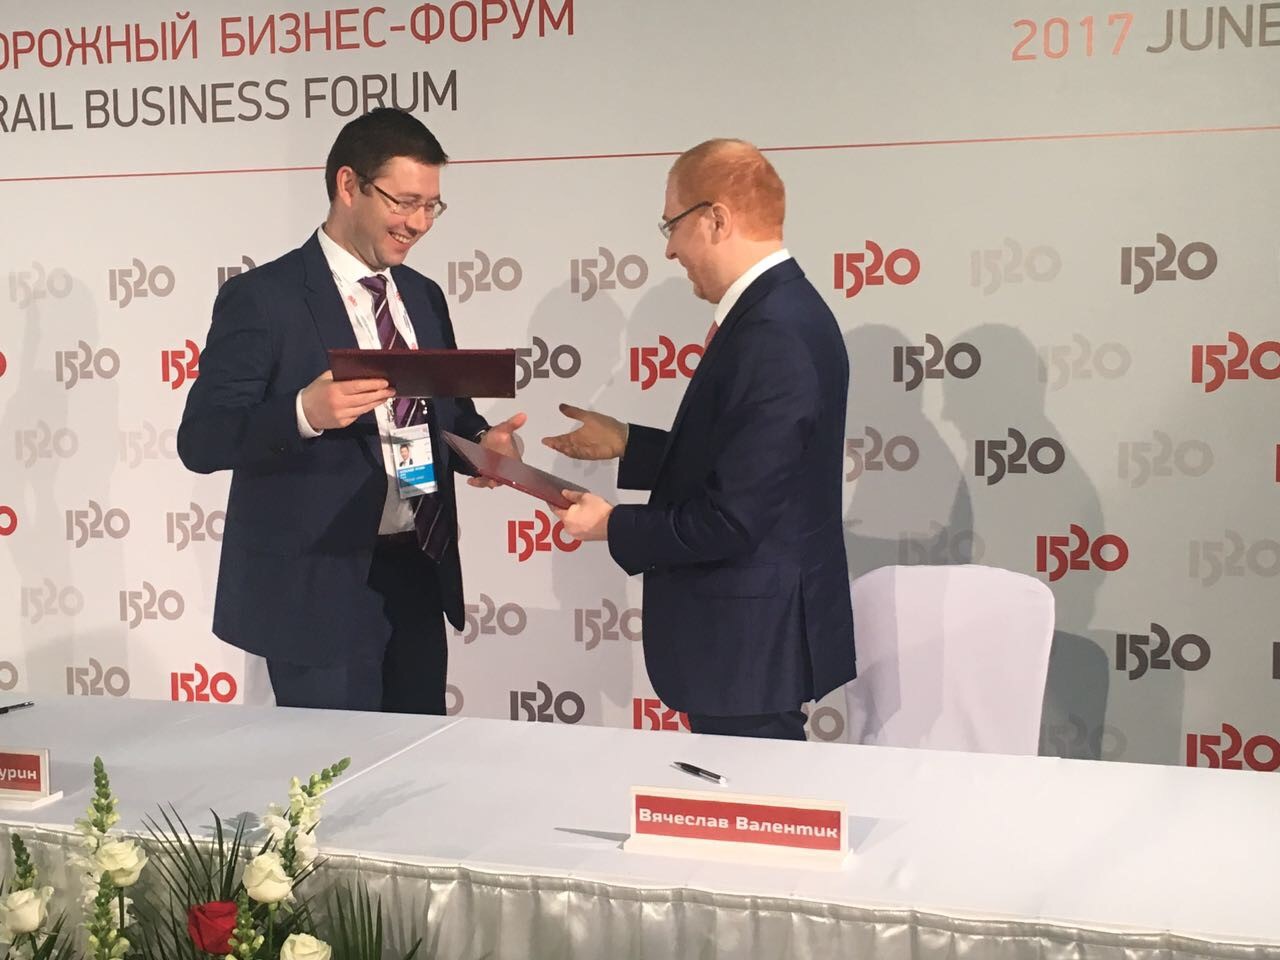 FESCO and "RZD Logistics" agree to cooperate on development of cargo transportation services